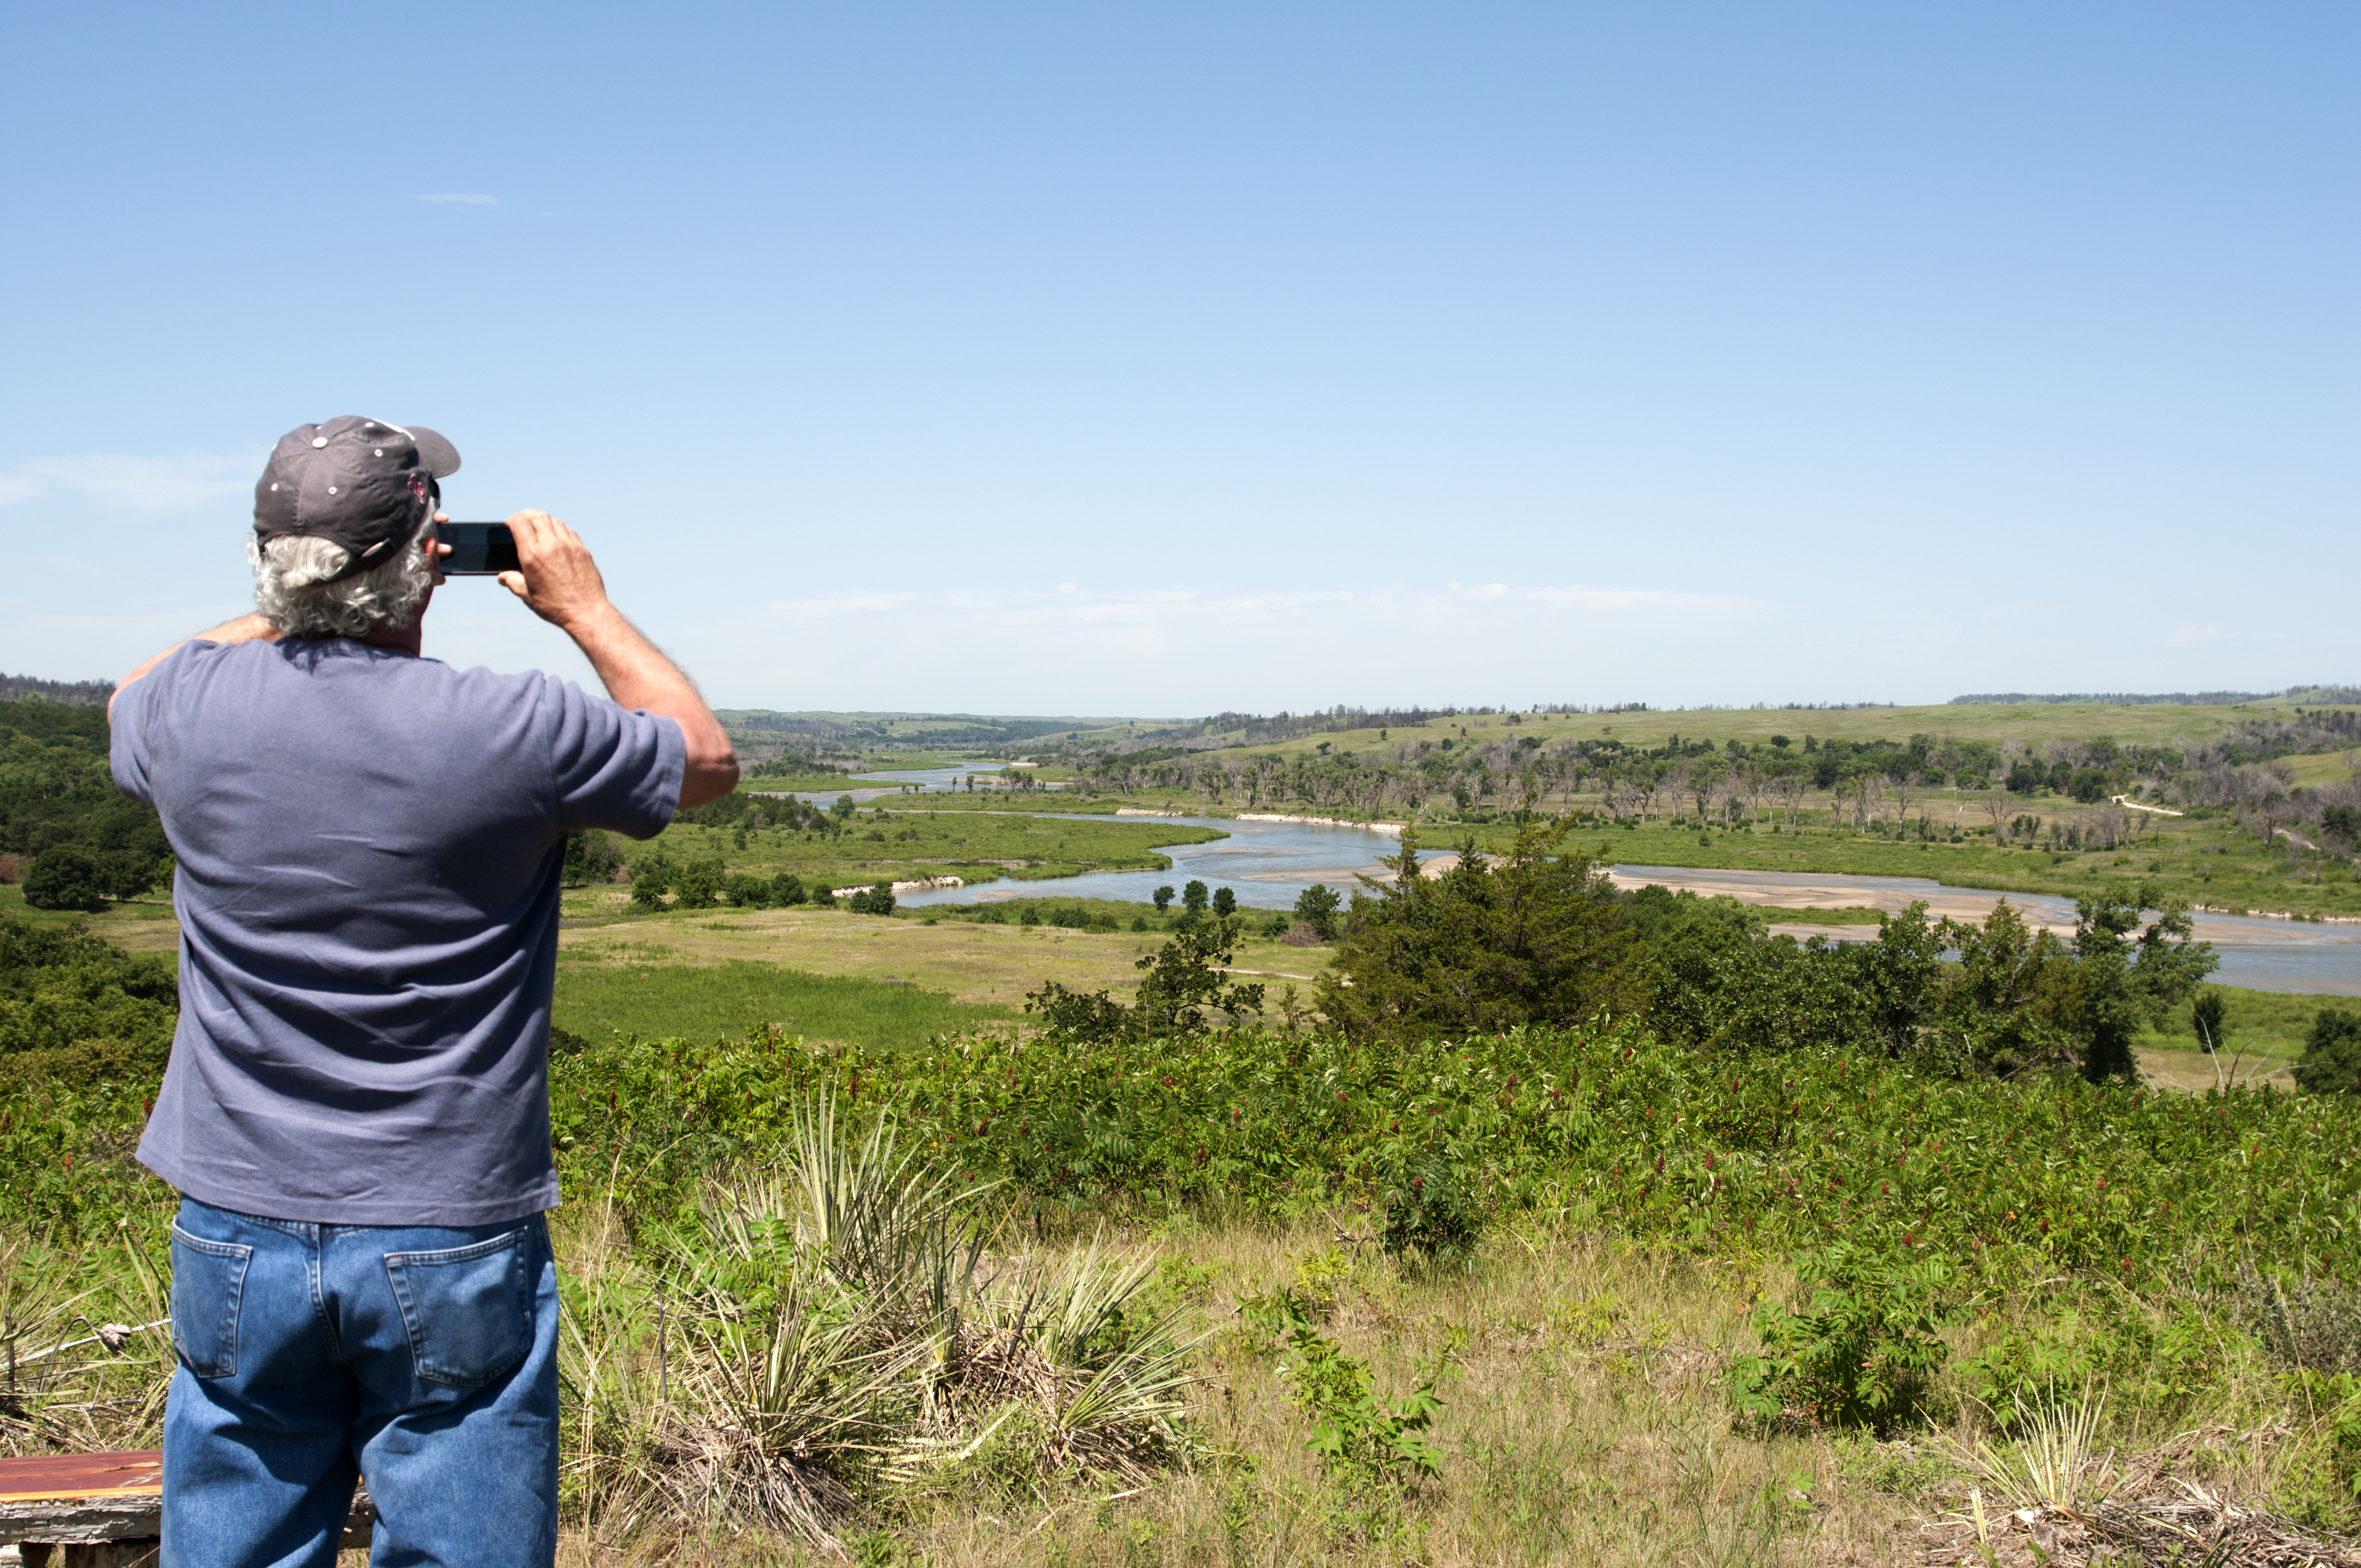 A man takes a photo of a meandering river from an overlook.